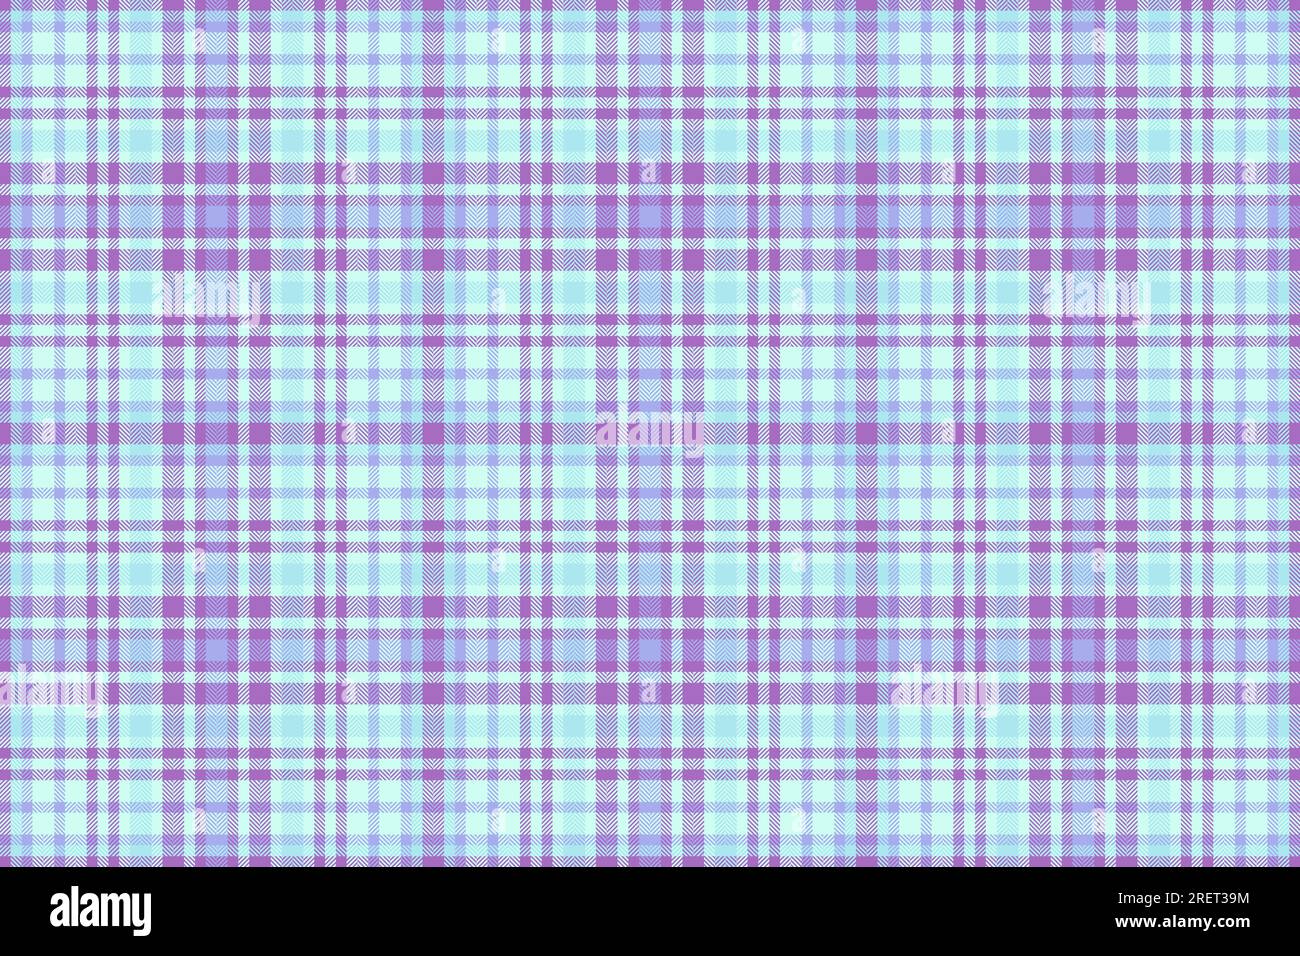 Tartan vector plaid of check pattern textile with a fabric background texture seamless in light and purple colors. Stock Vector